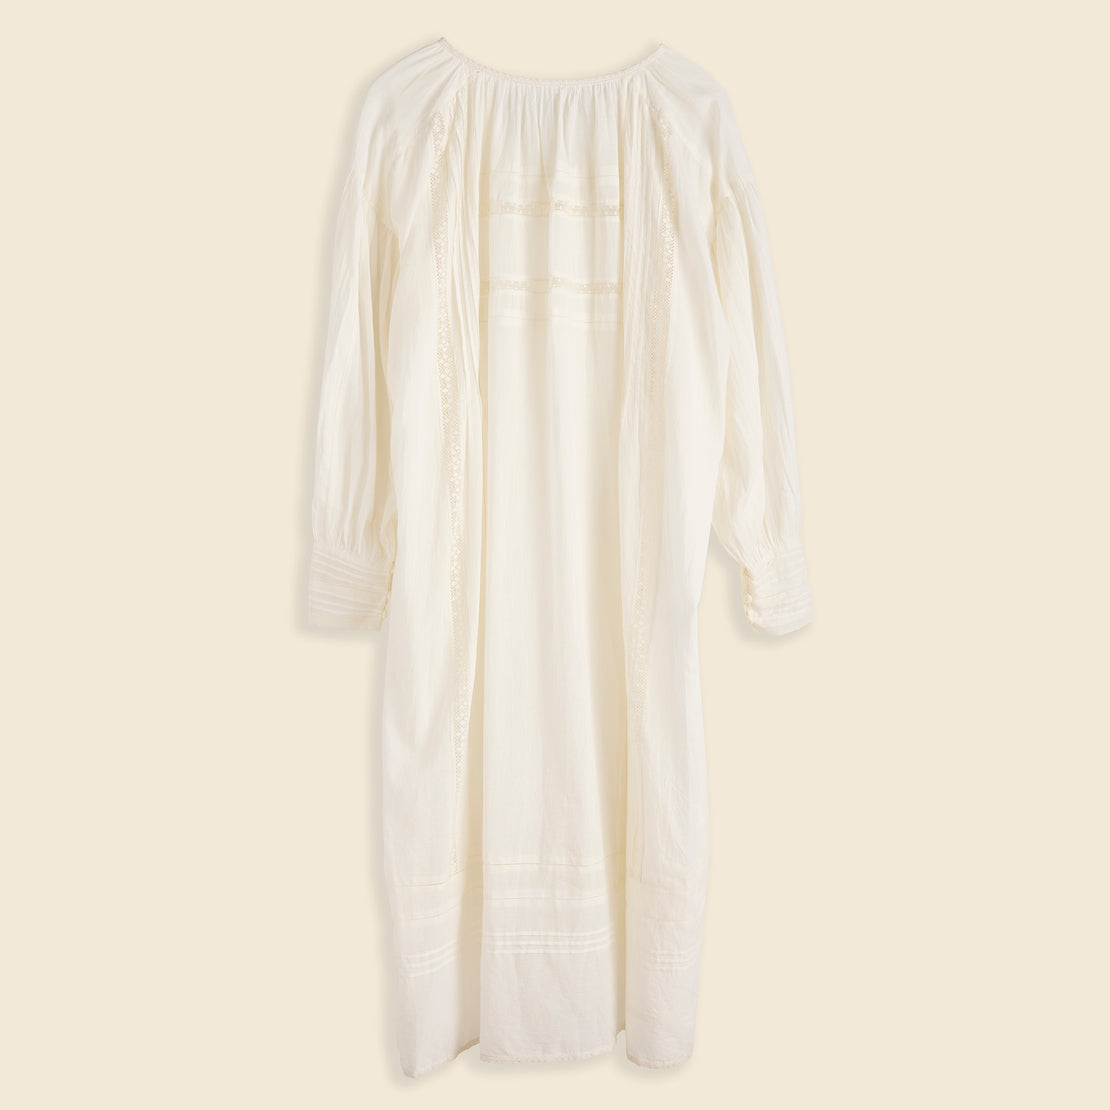 Oversized VinLace Dress - Off White - BEAMS BOY - STAG Provisions - W - Onepiece - Dress